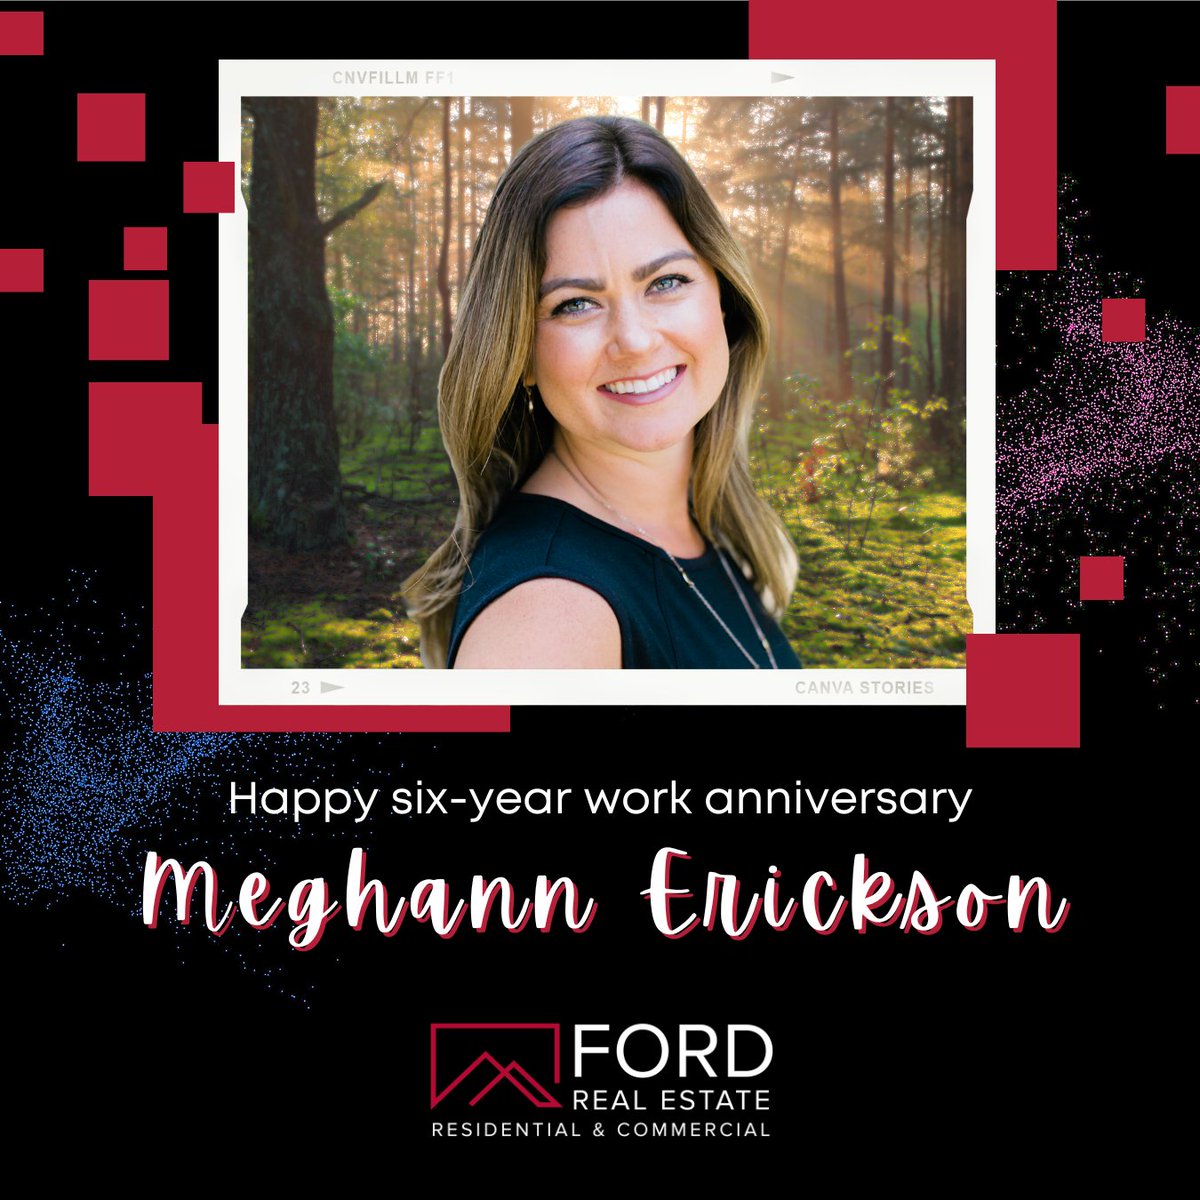 🎉👏 Cheers to Meghann Erickson on her 6th work anniversary at Ford Real Estate! 🥳 #WorkAnniversary #Realtor